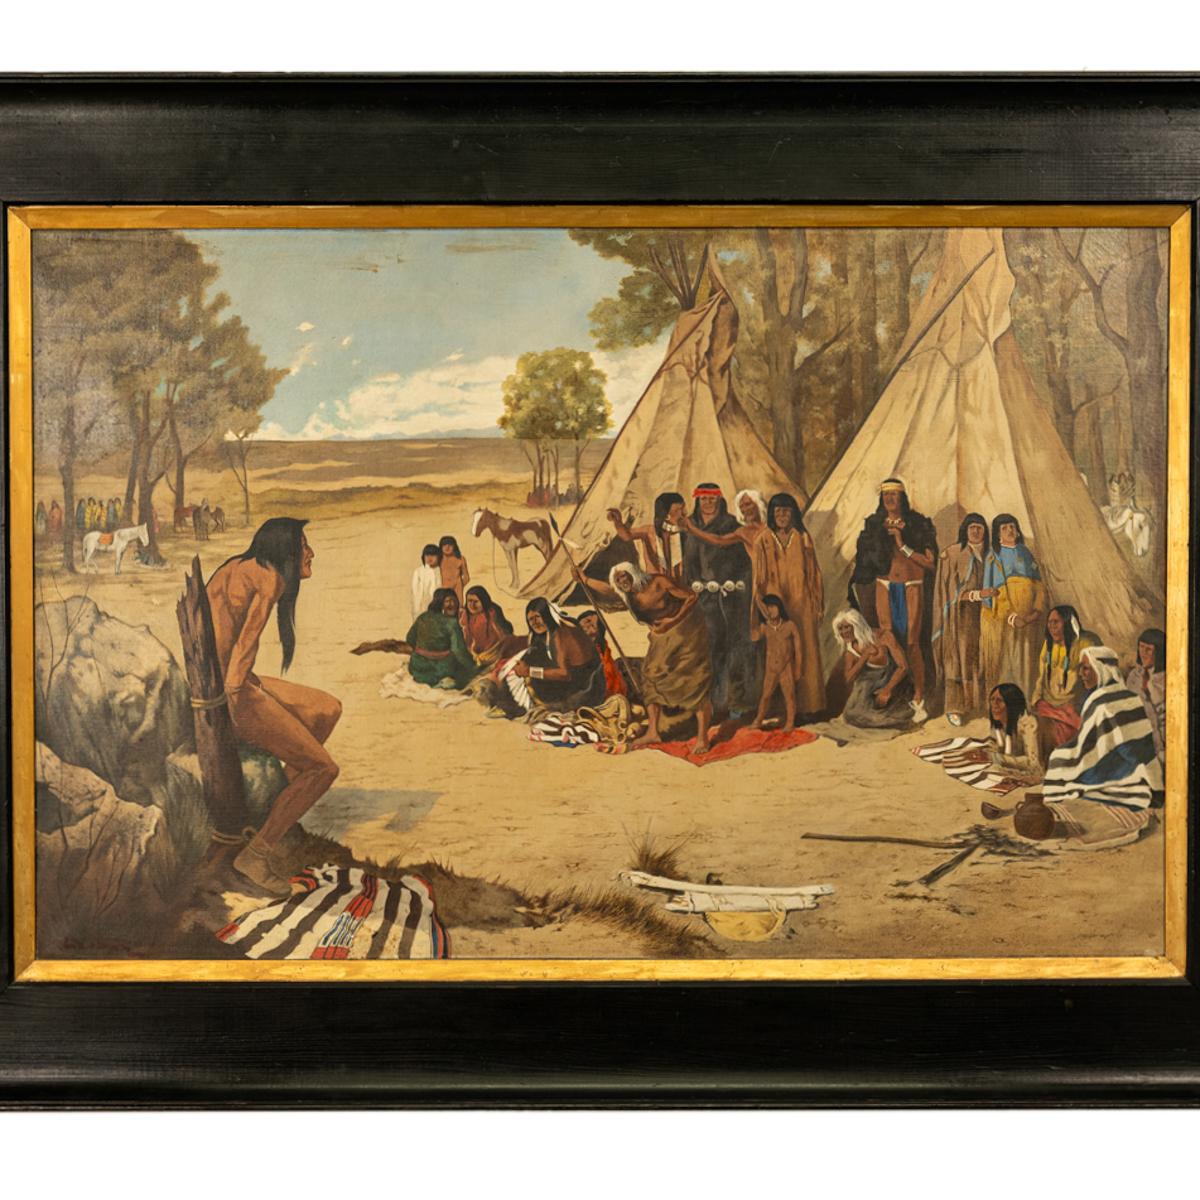 A large American Western, Native American oil on canvas landscape, by Frank Paul Sauerwein (1871-1910), 